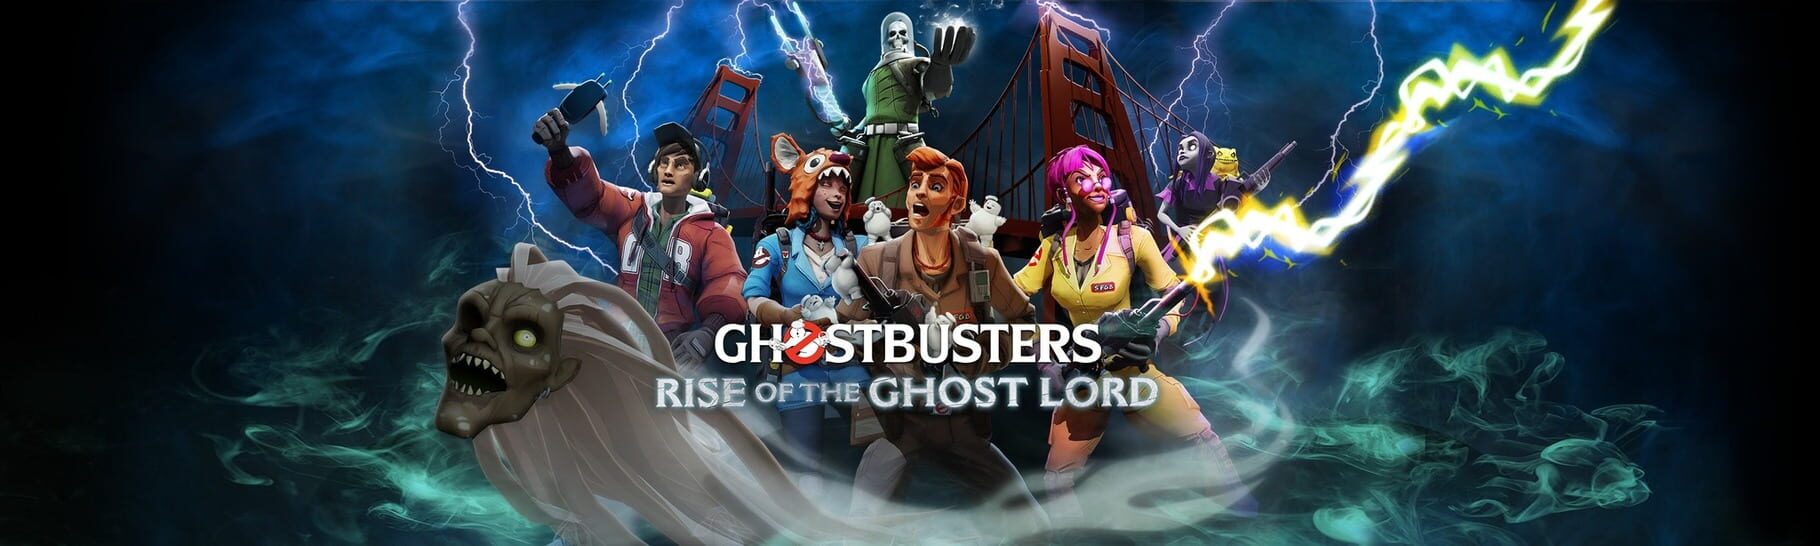 Arte - Ghostbusters: Rise of the Ghost Lord